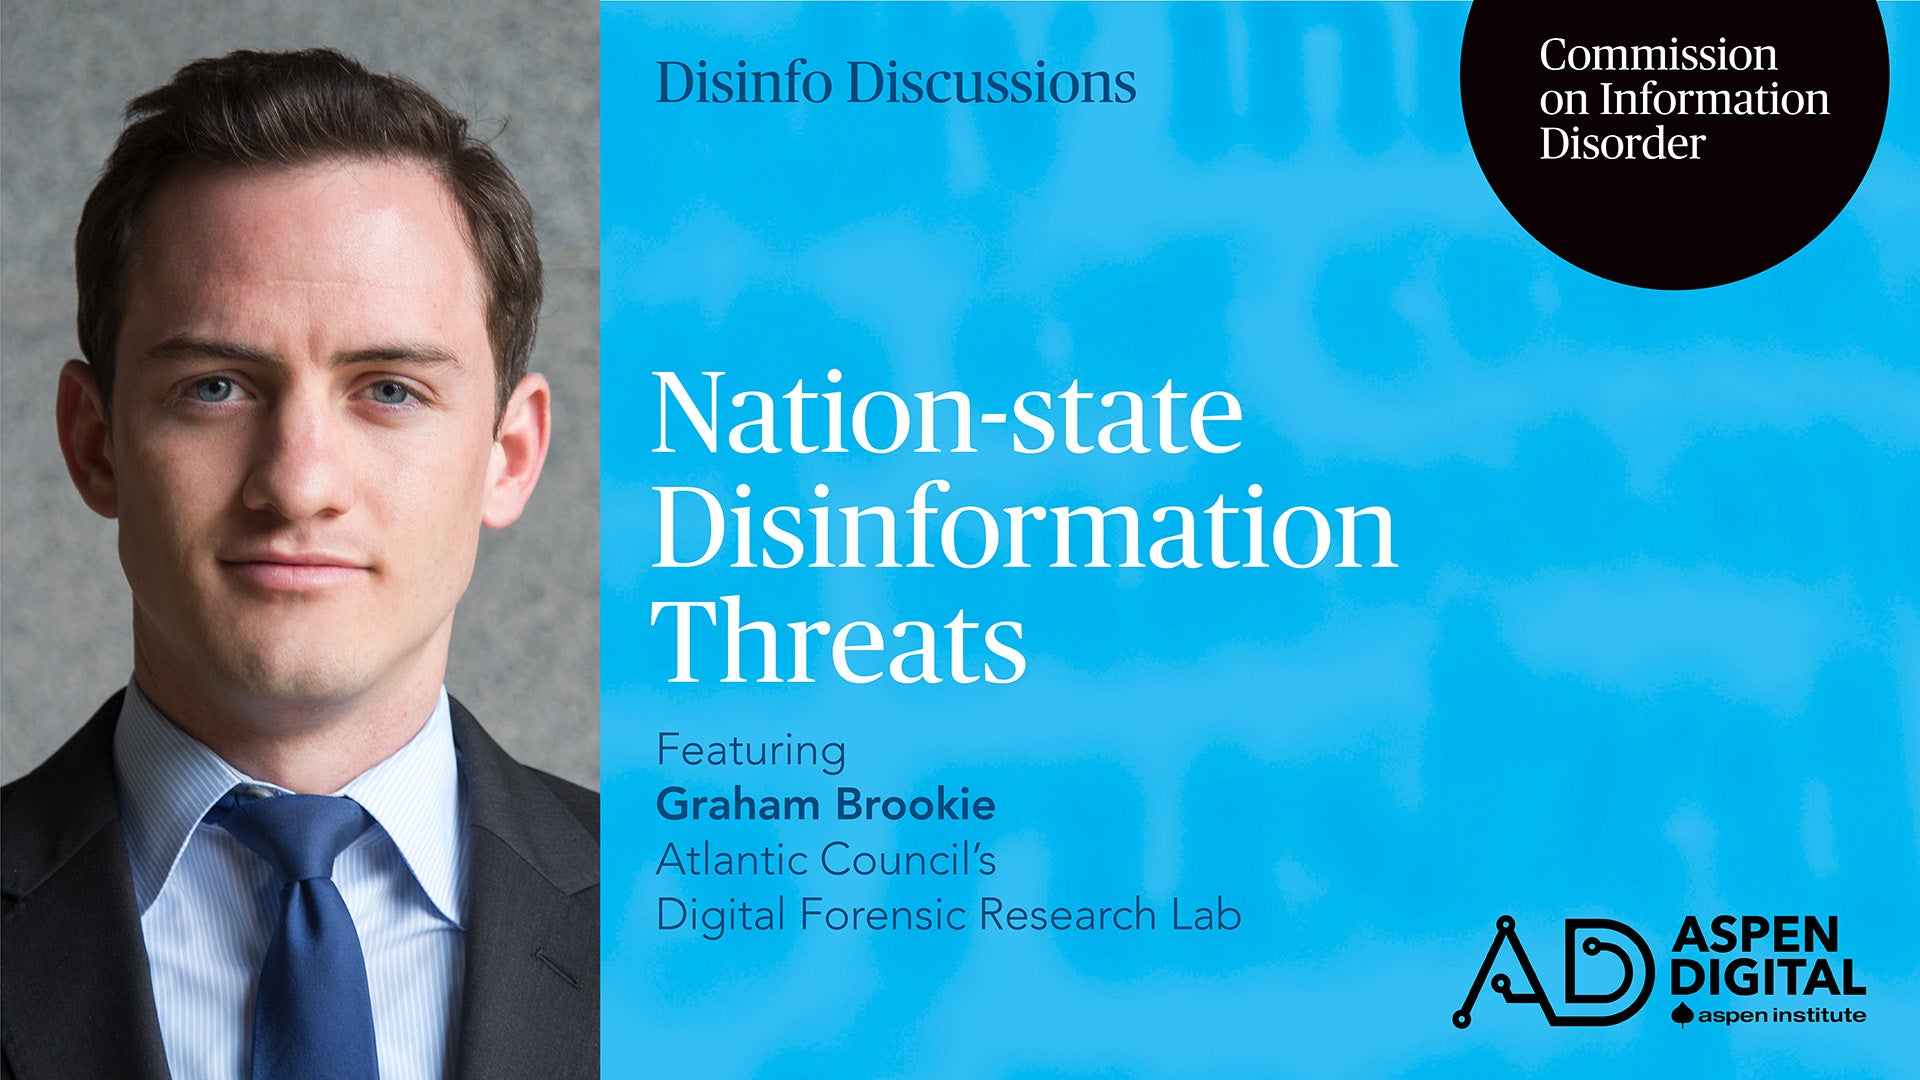 Nation-state Disinformation Threats